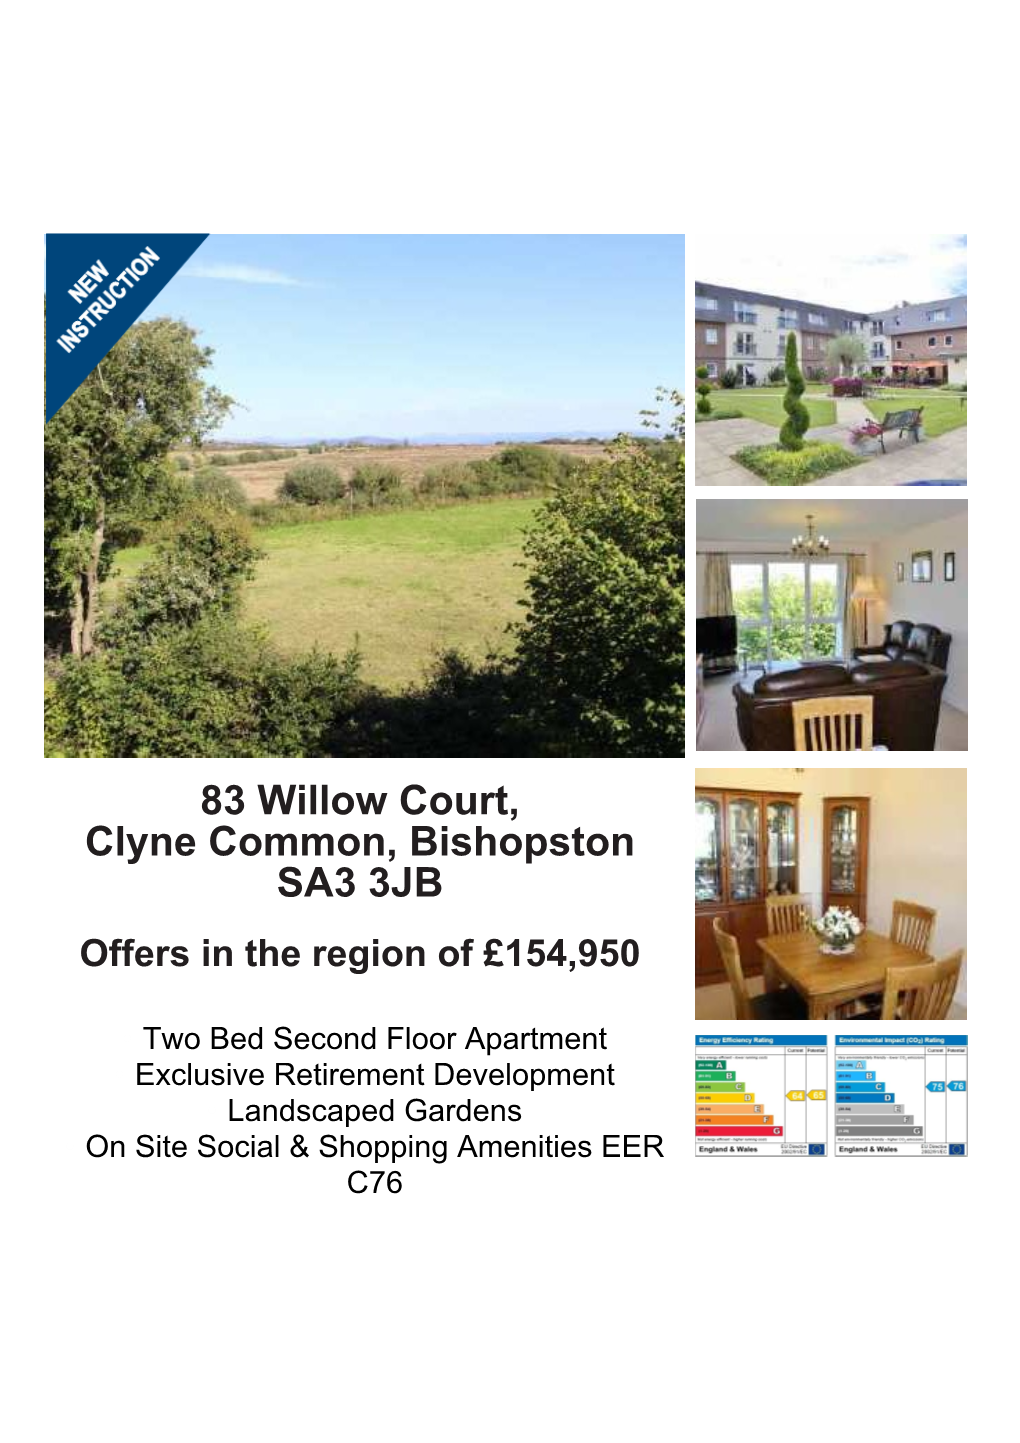 83 Willow Court, Clyne Common, Bishopston SA3 3JB Offers in the Region of £154,950